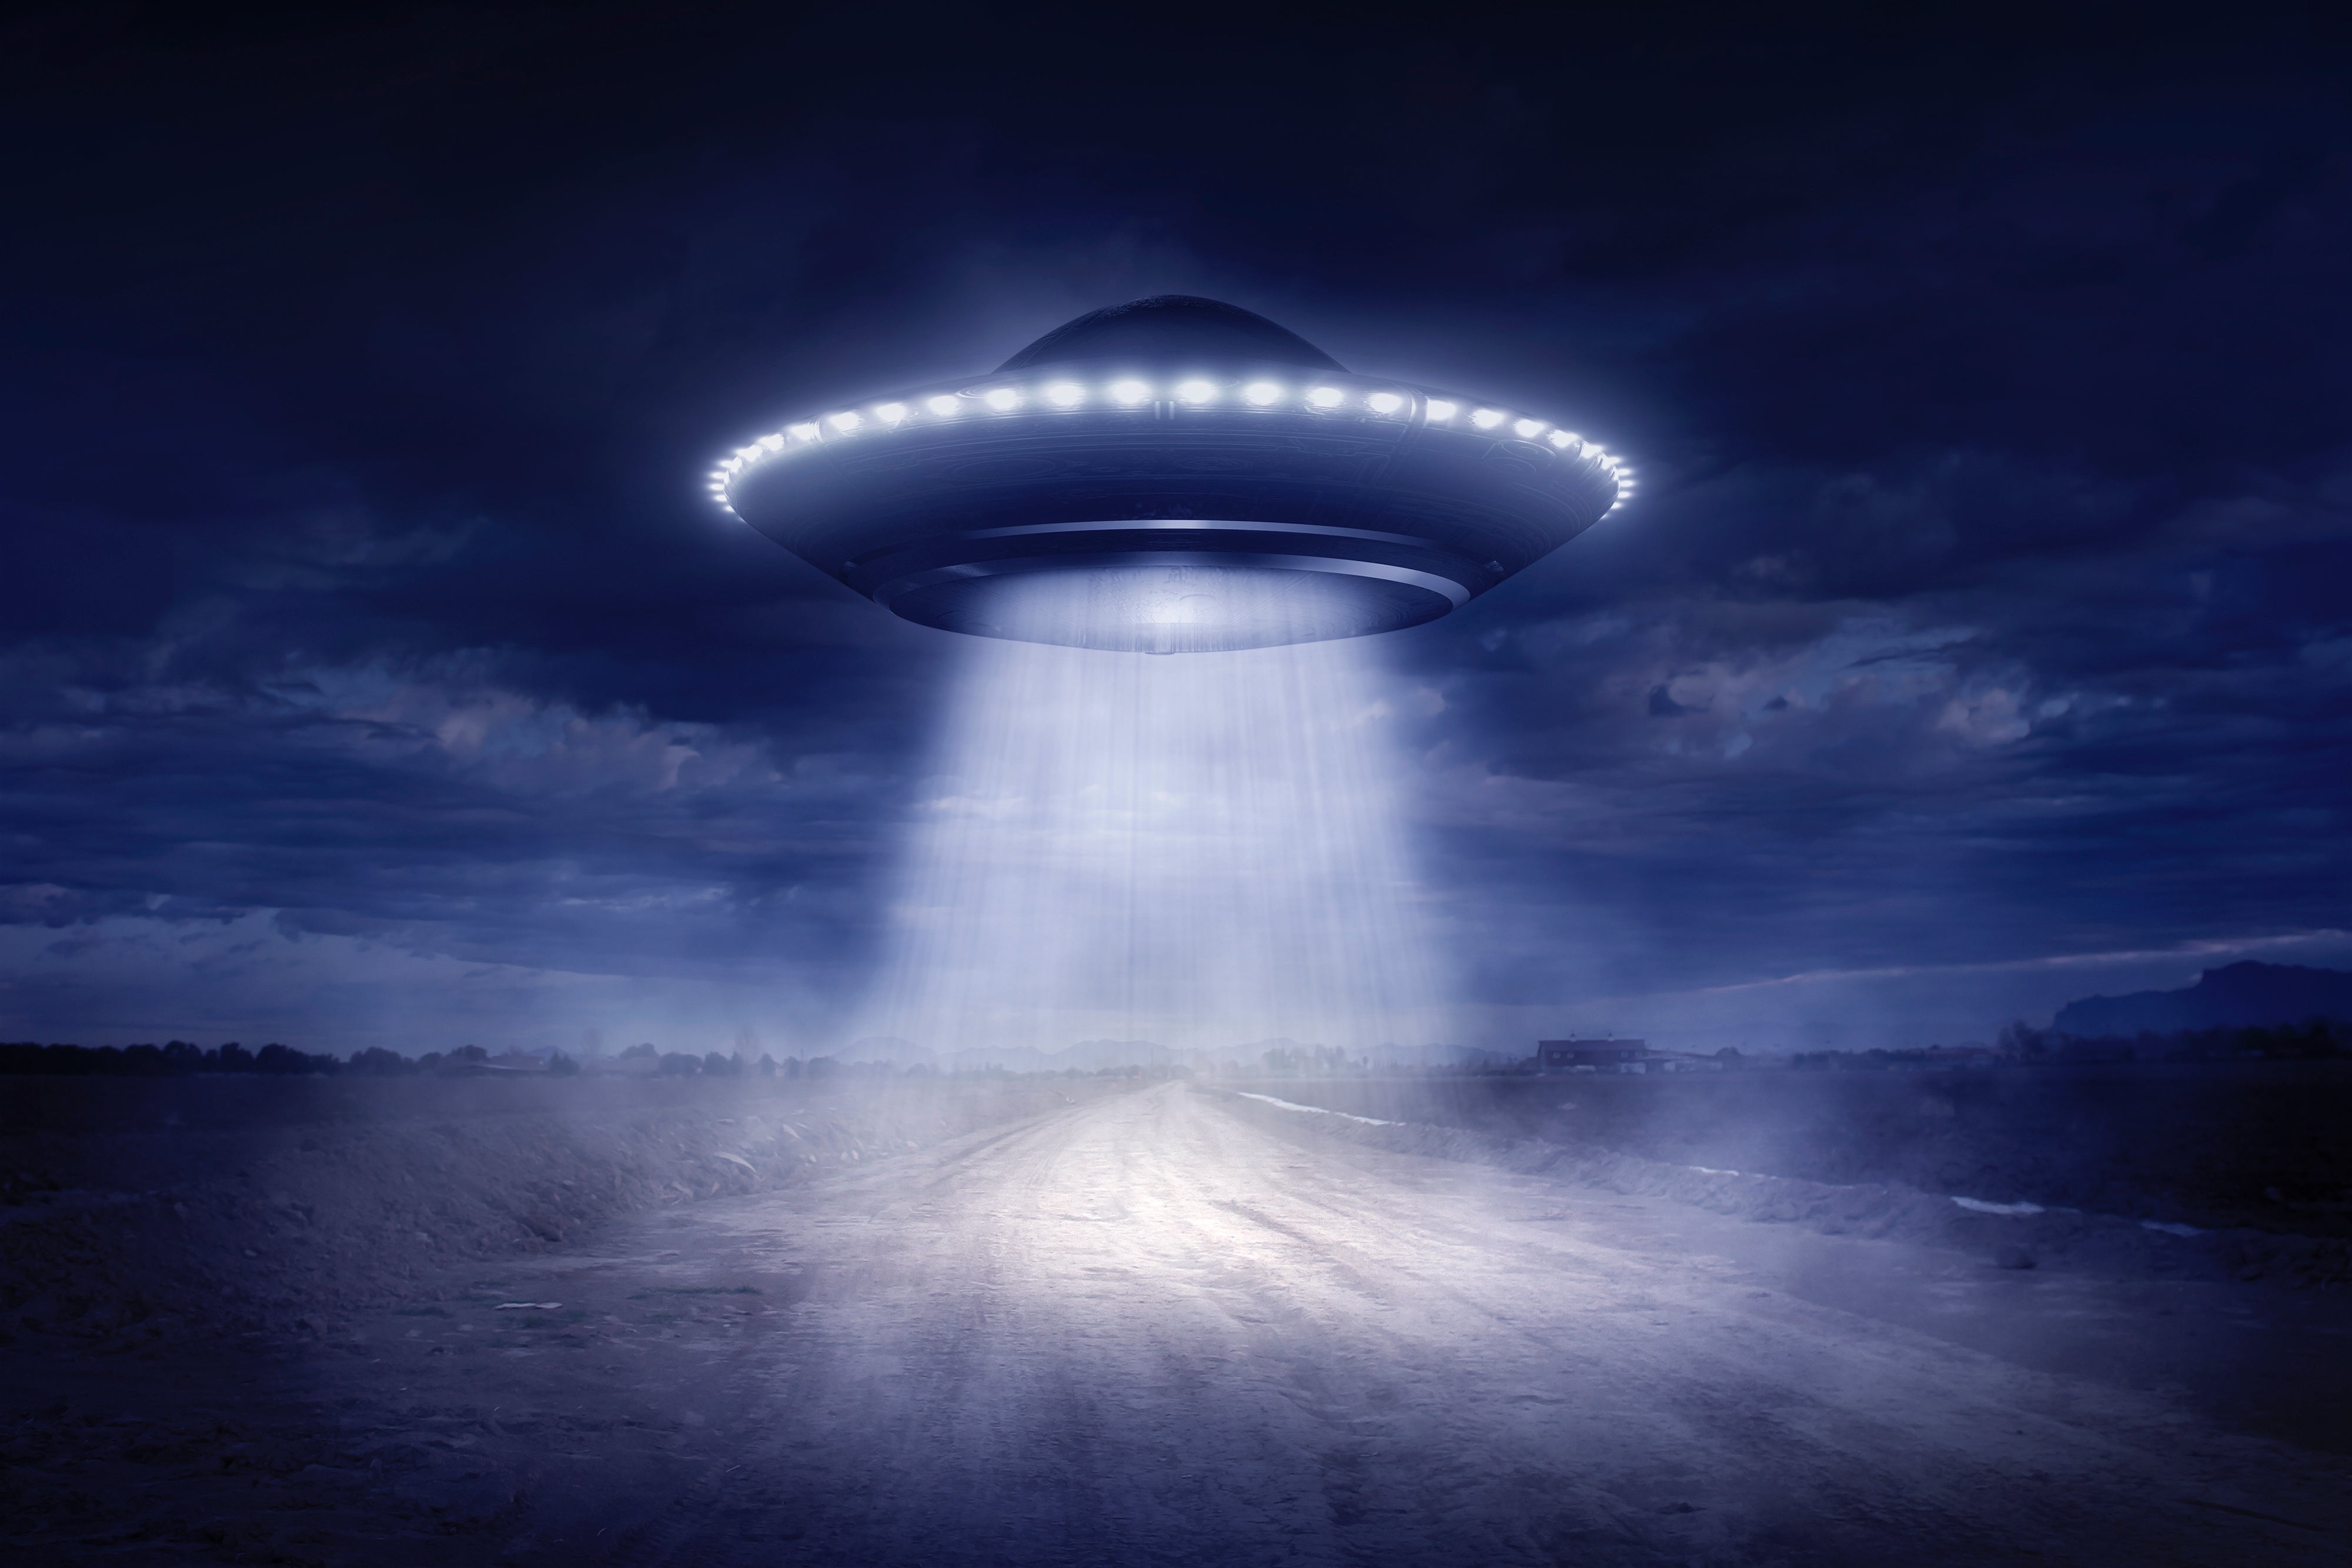 What Should We Do if Extraterrestrials Show Up? - Scientific American